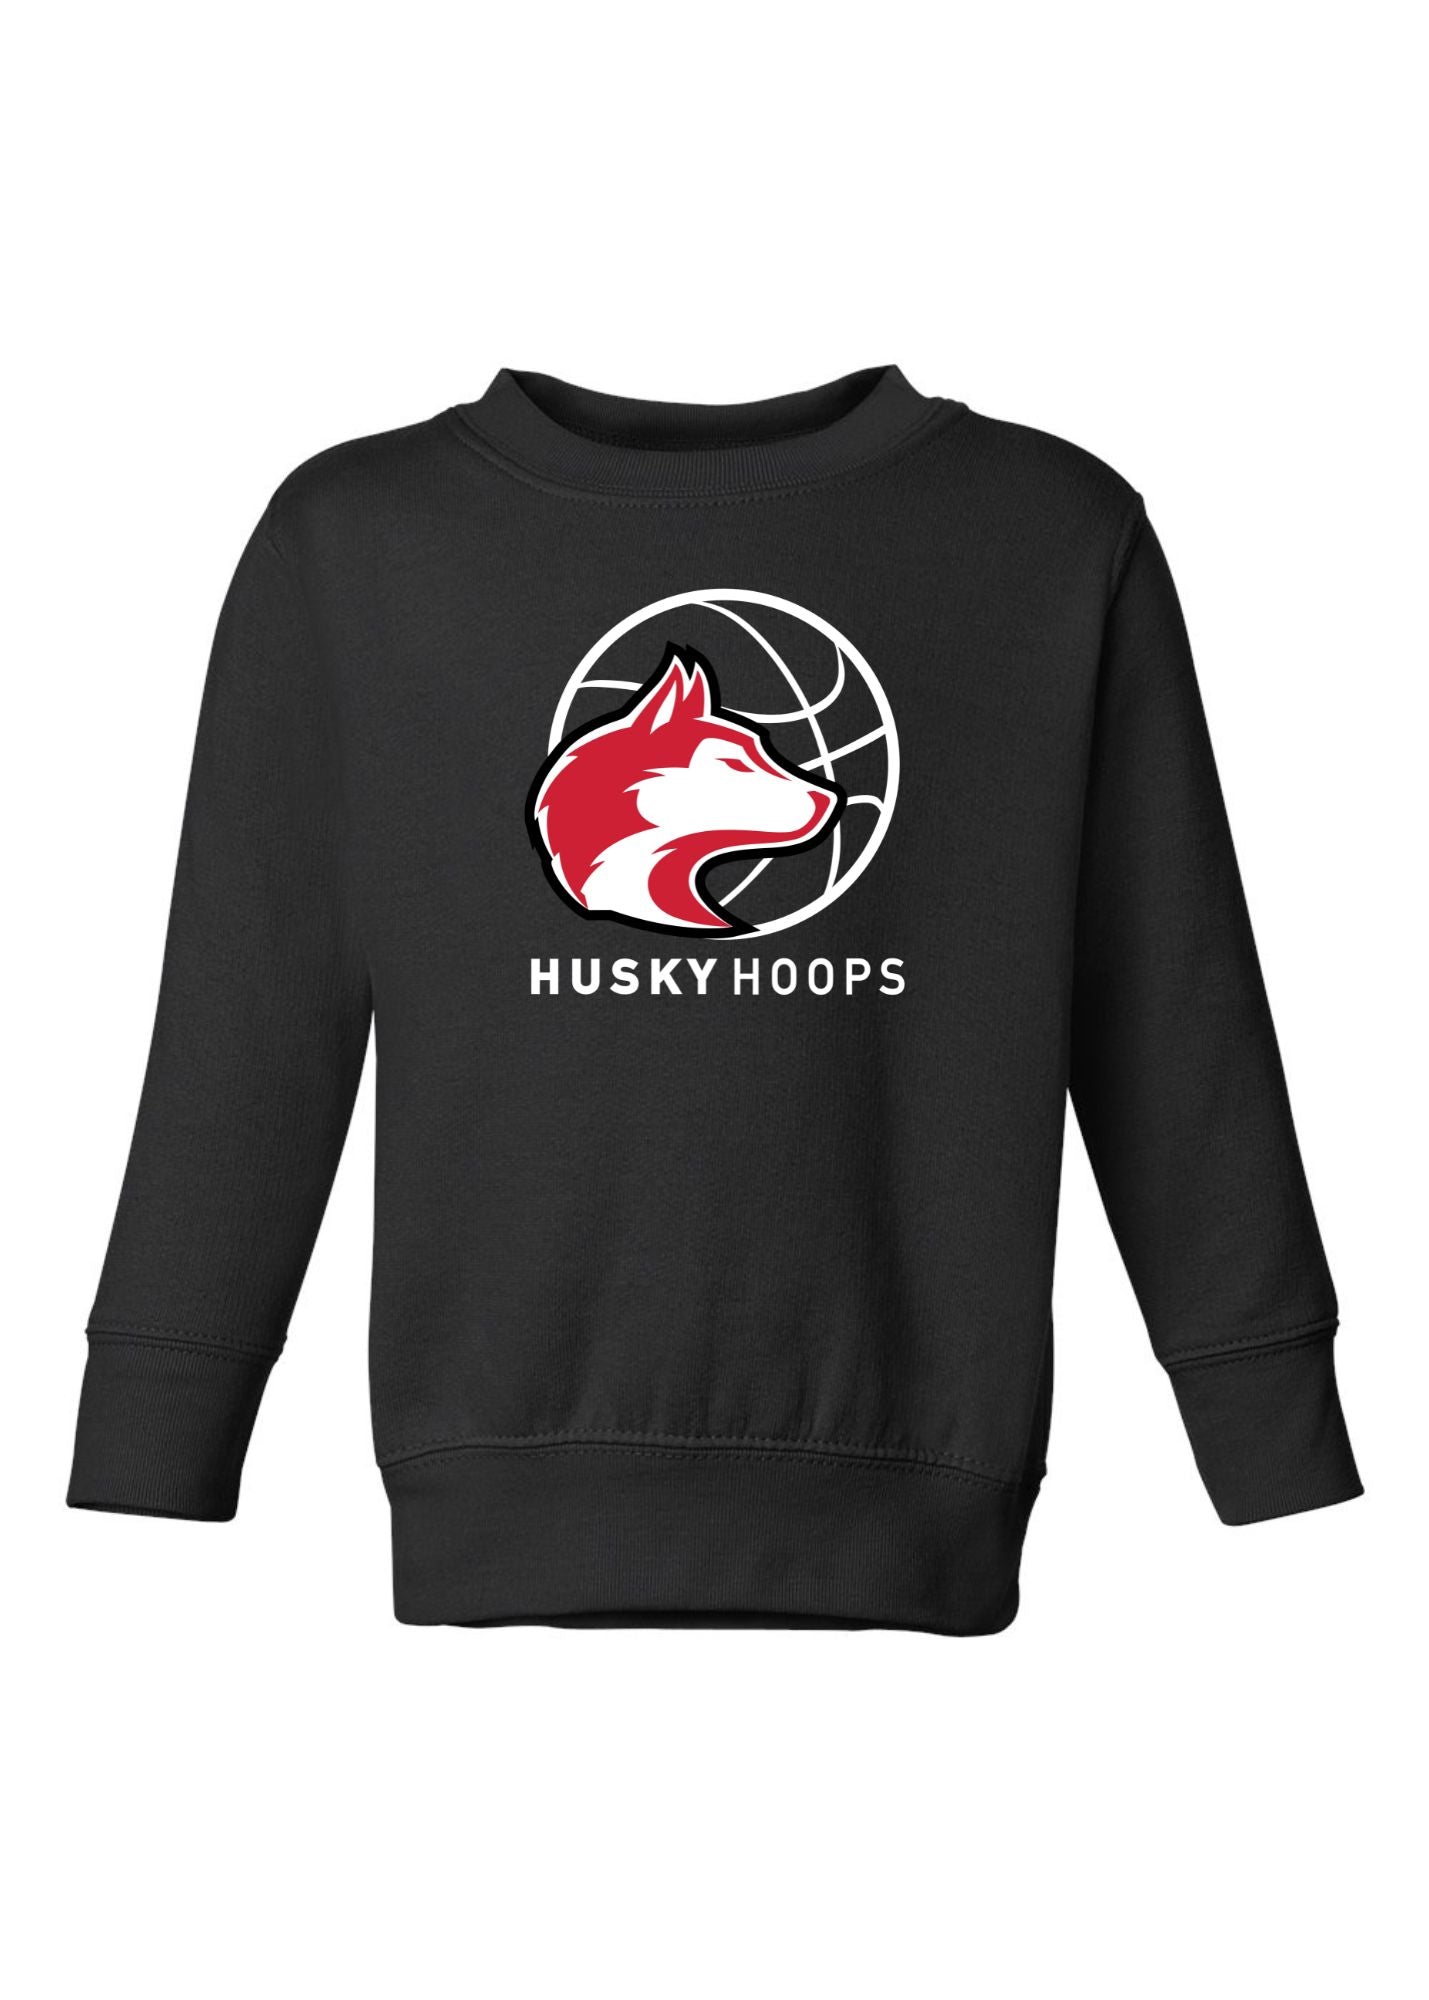 Husky Hoops | Kids Pullover-Kids Crewneck-Sister Shirts-Sister Shirts, Cute & Custom Tees for Mama & Littles in Trussville, Alabama.